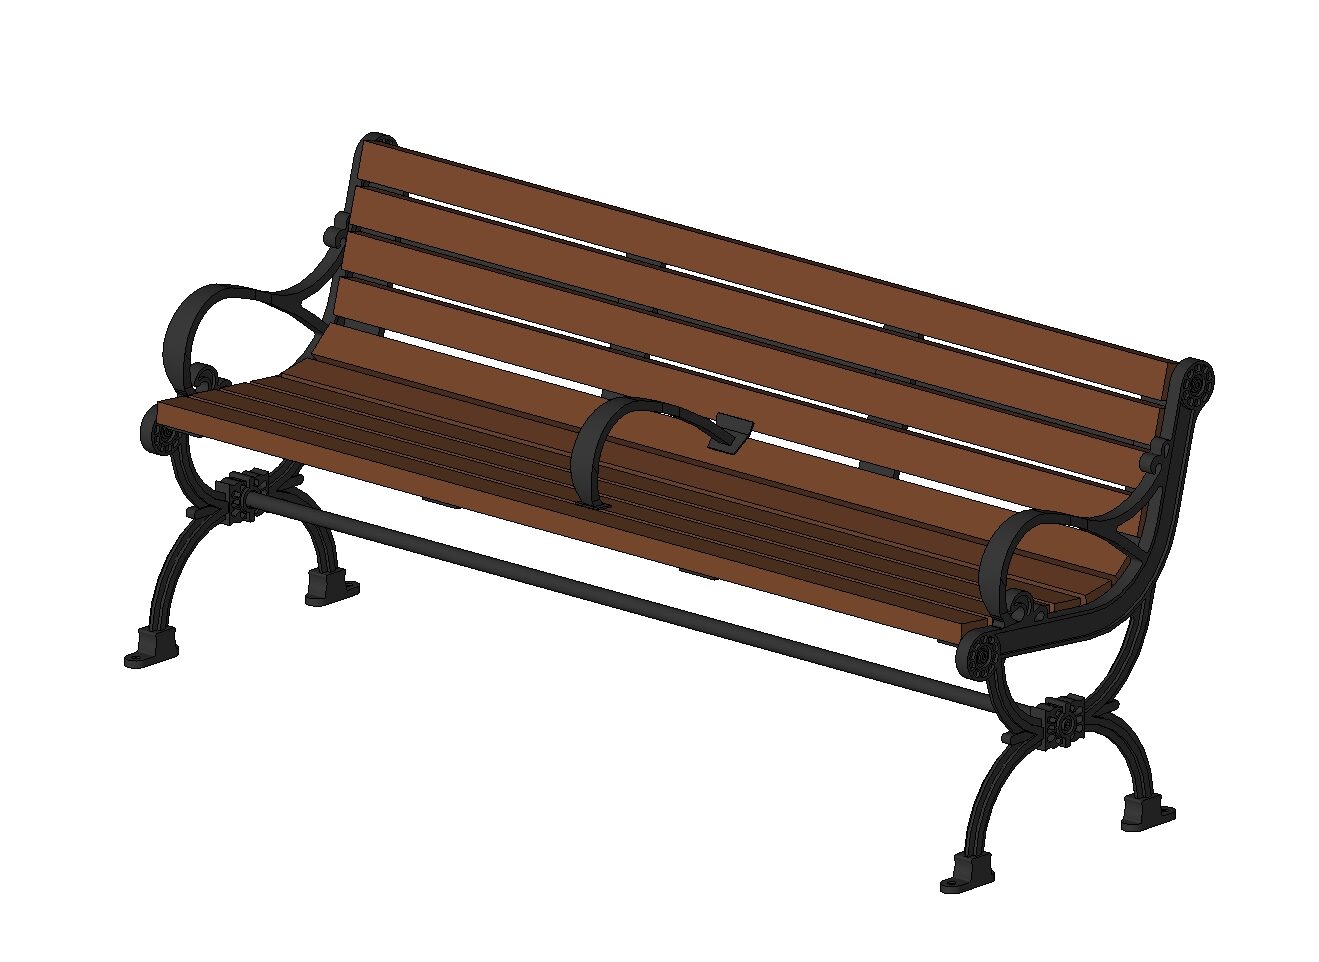 Bench for outdoor use for gardens